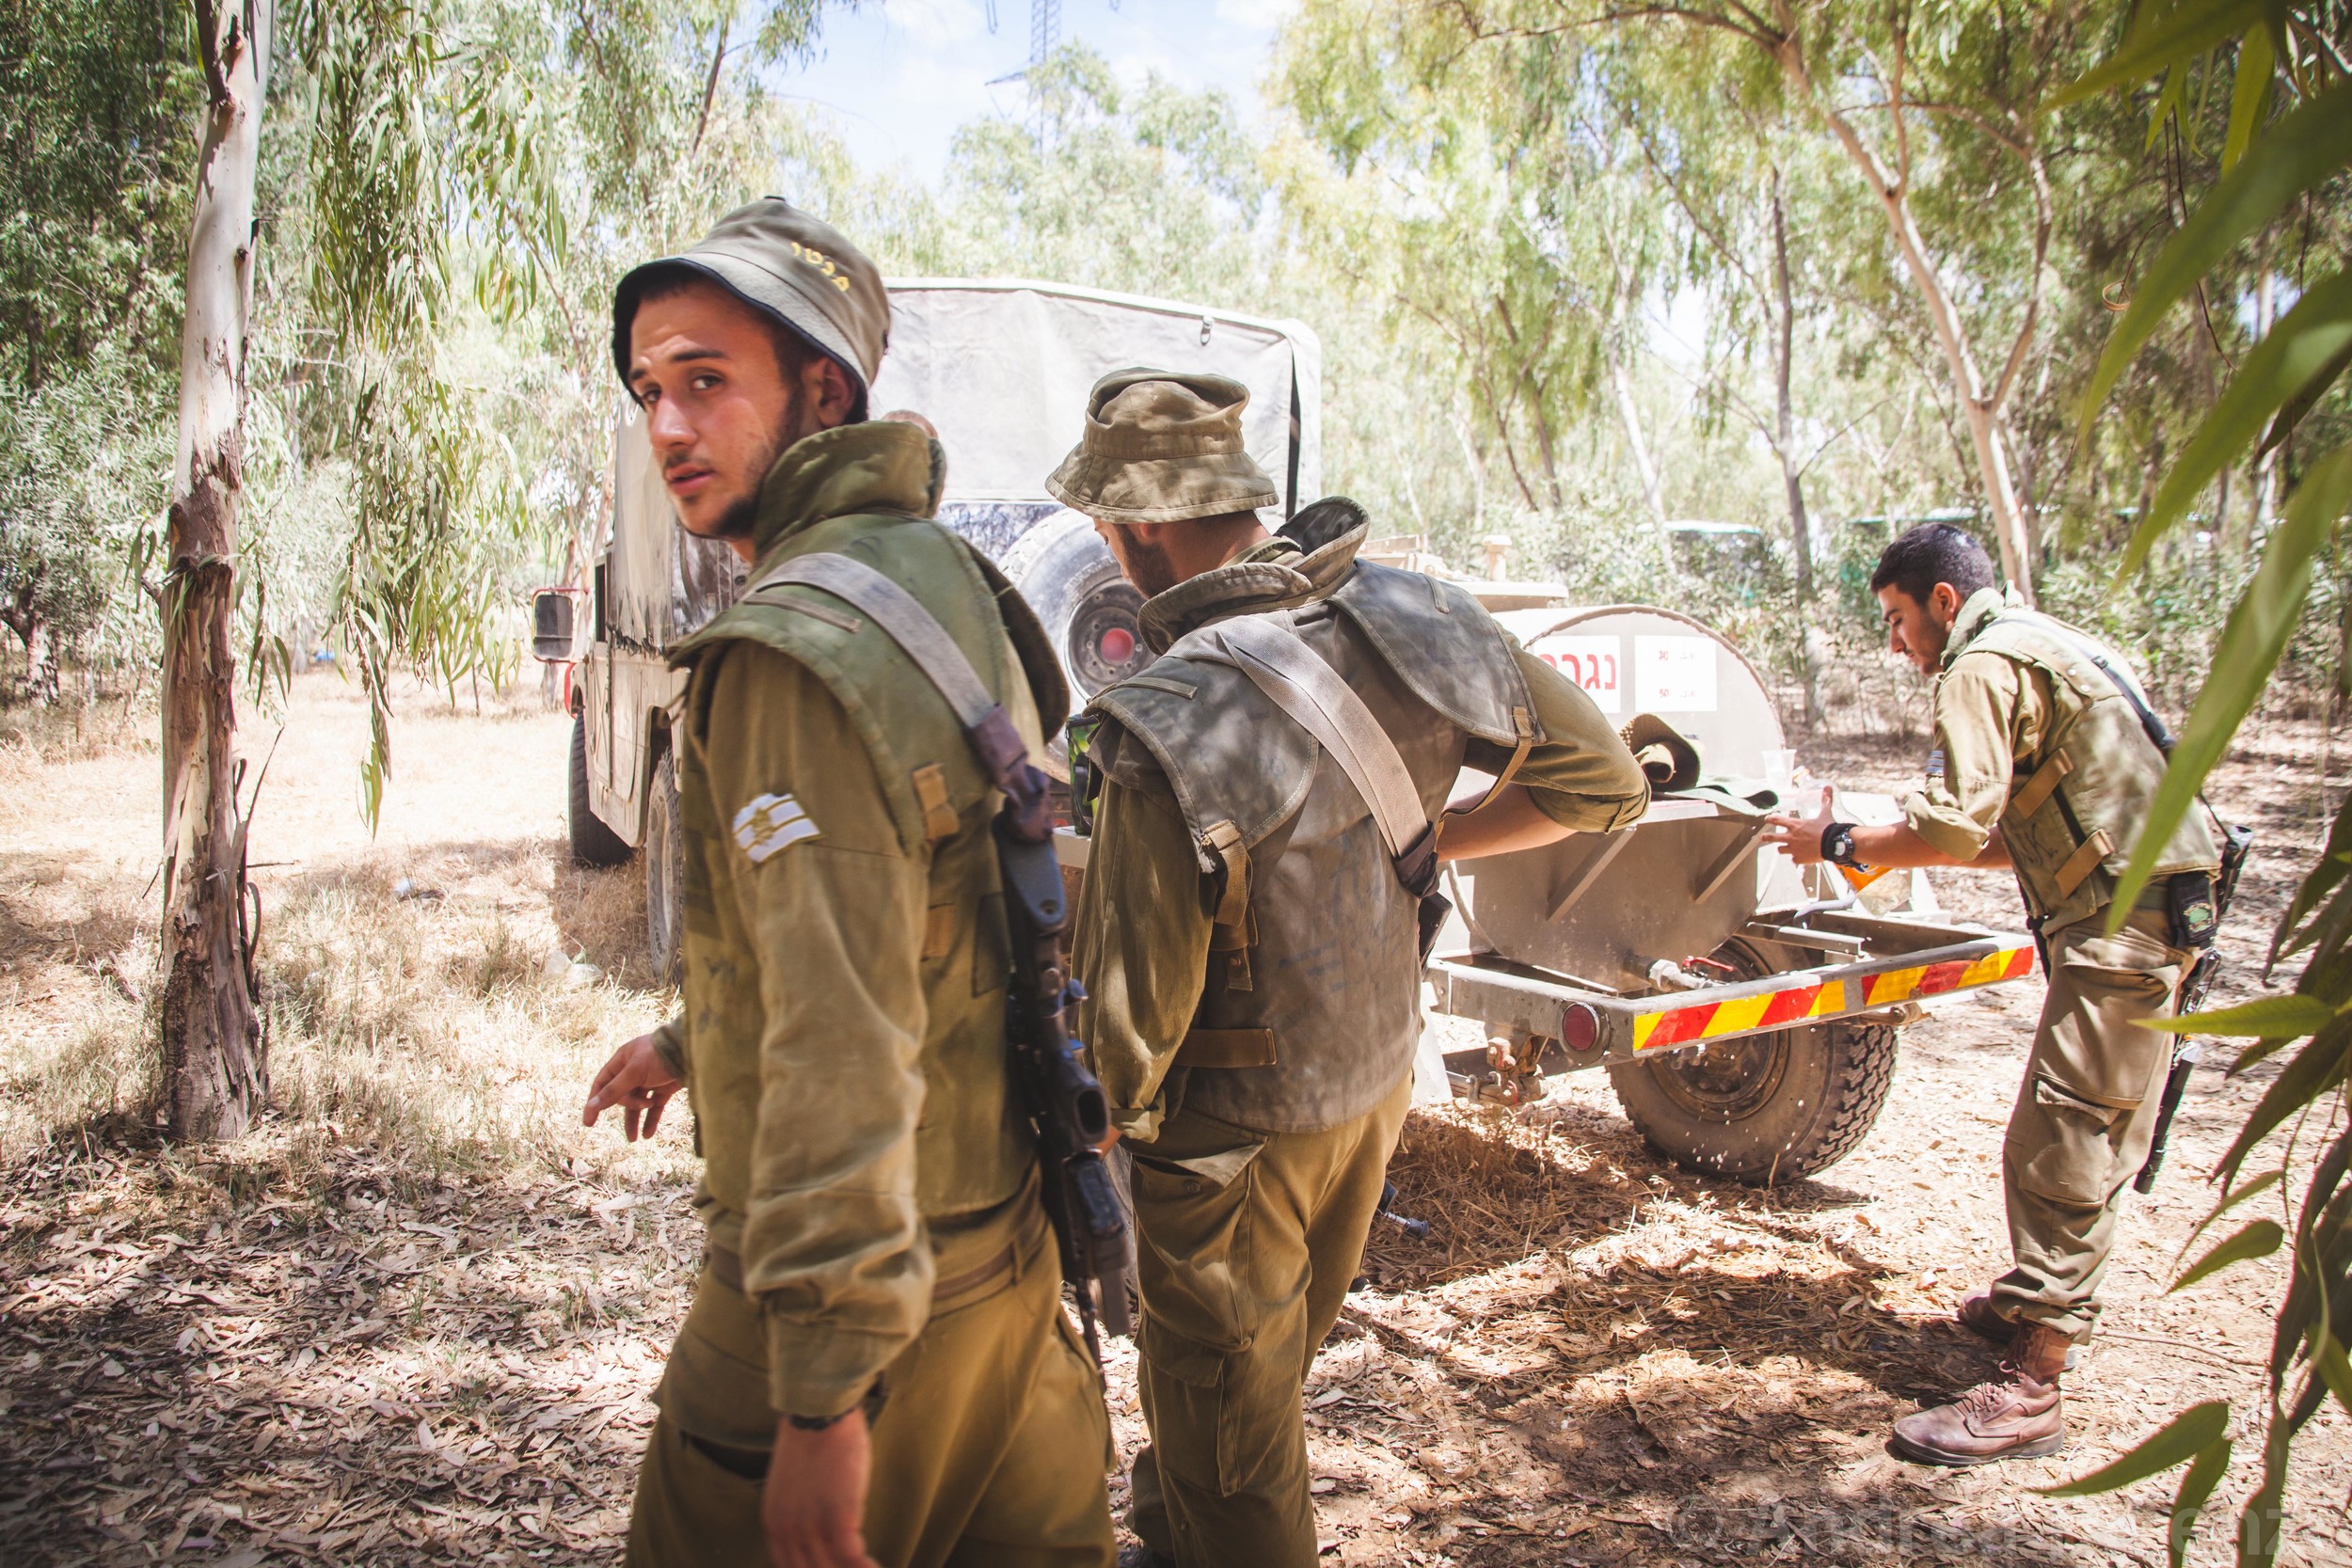  Motor rockets can be heard going off as close as 500 meters away as the soldiers gather to receive further command as the ground incursion begins as part of Operation Protective Edge.&nbsp; 